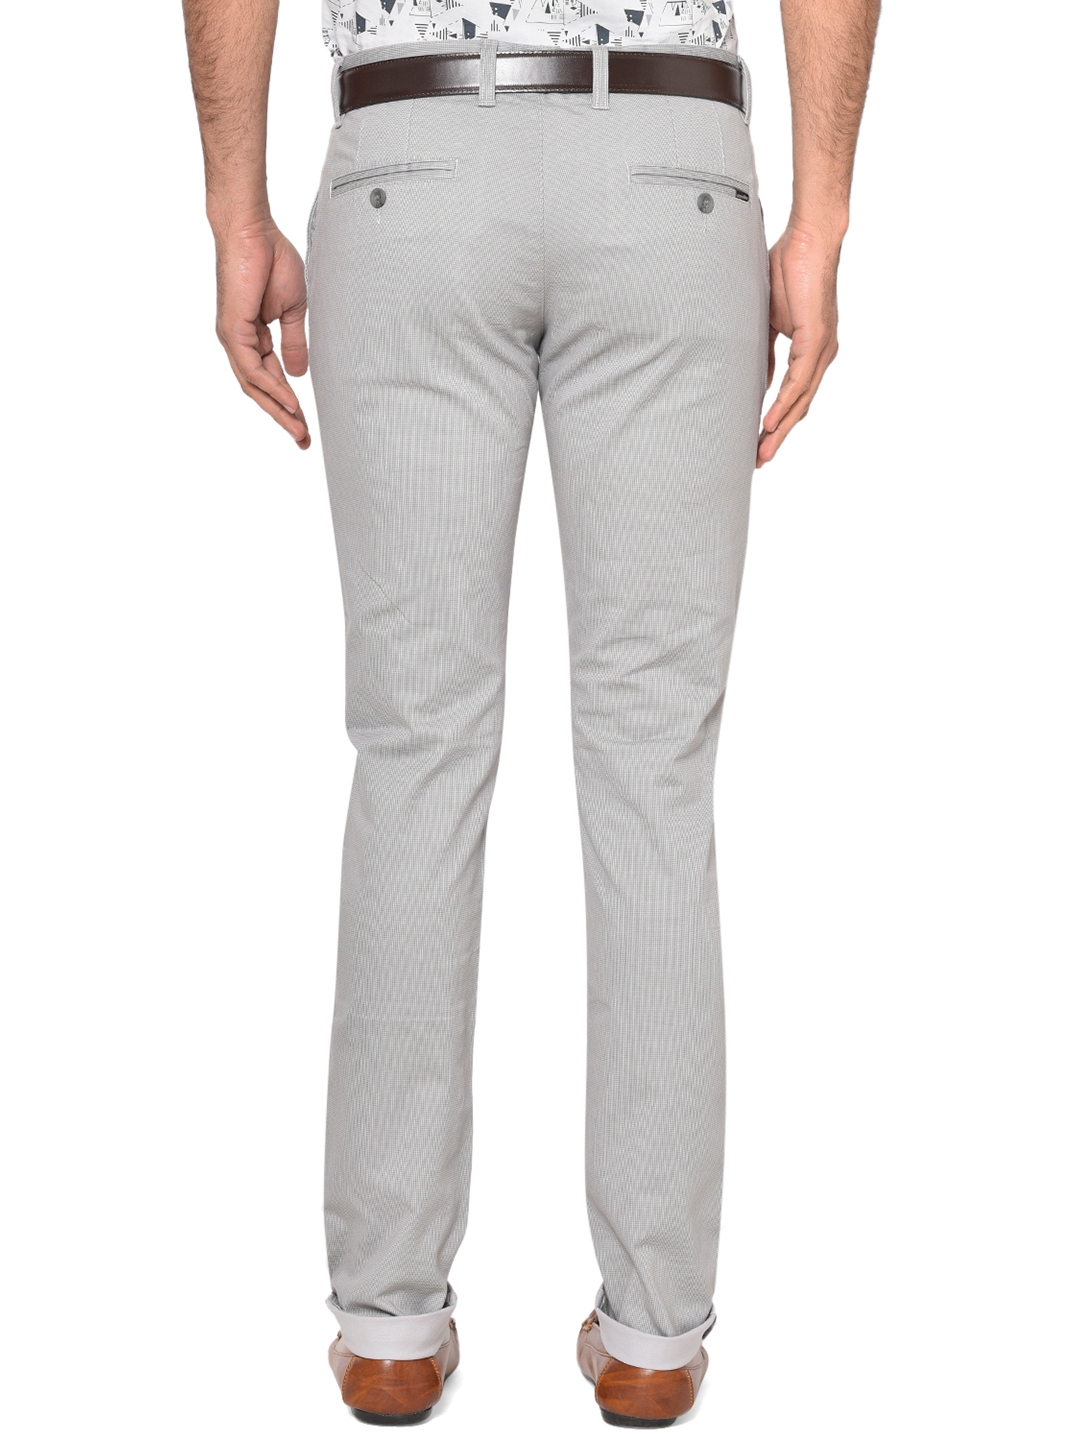 Greenfibre | Steel Grey Solid Super Slim Fit Casual Trouser | Greenfibre 2